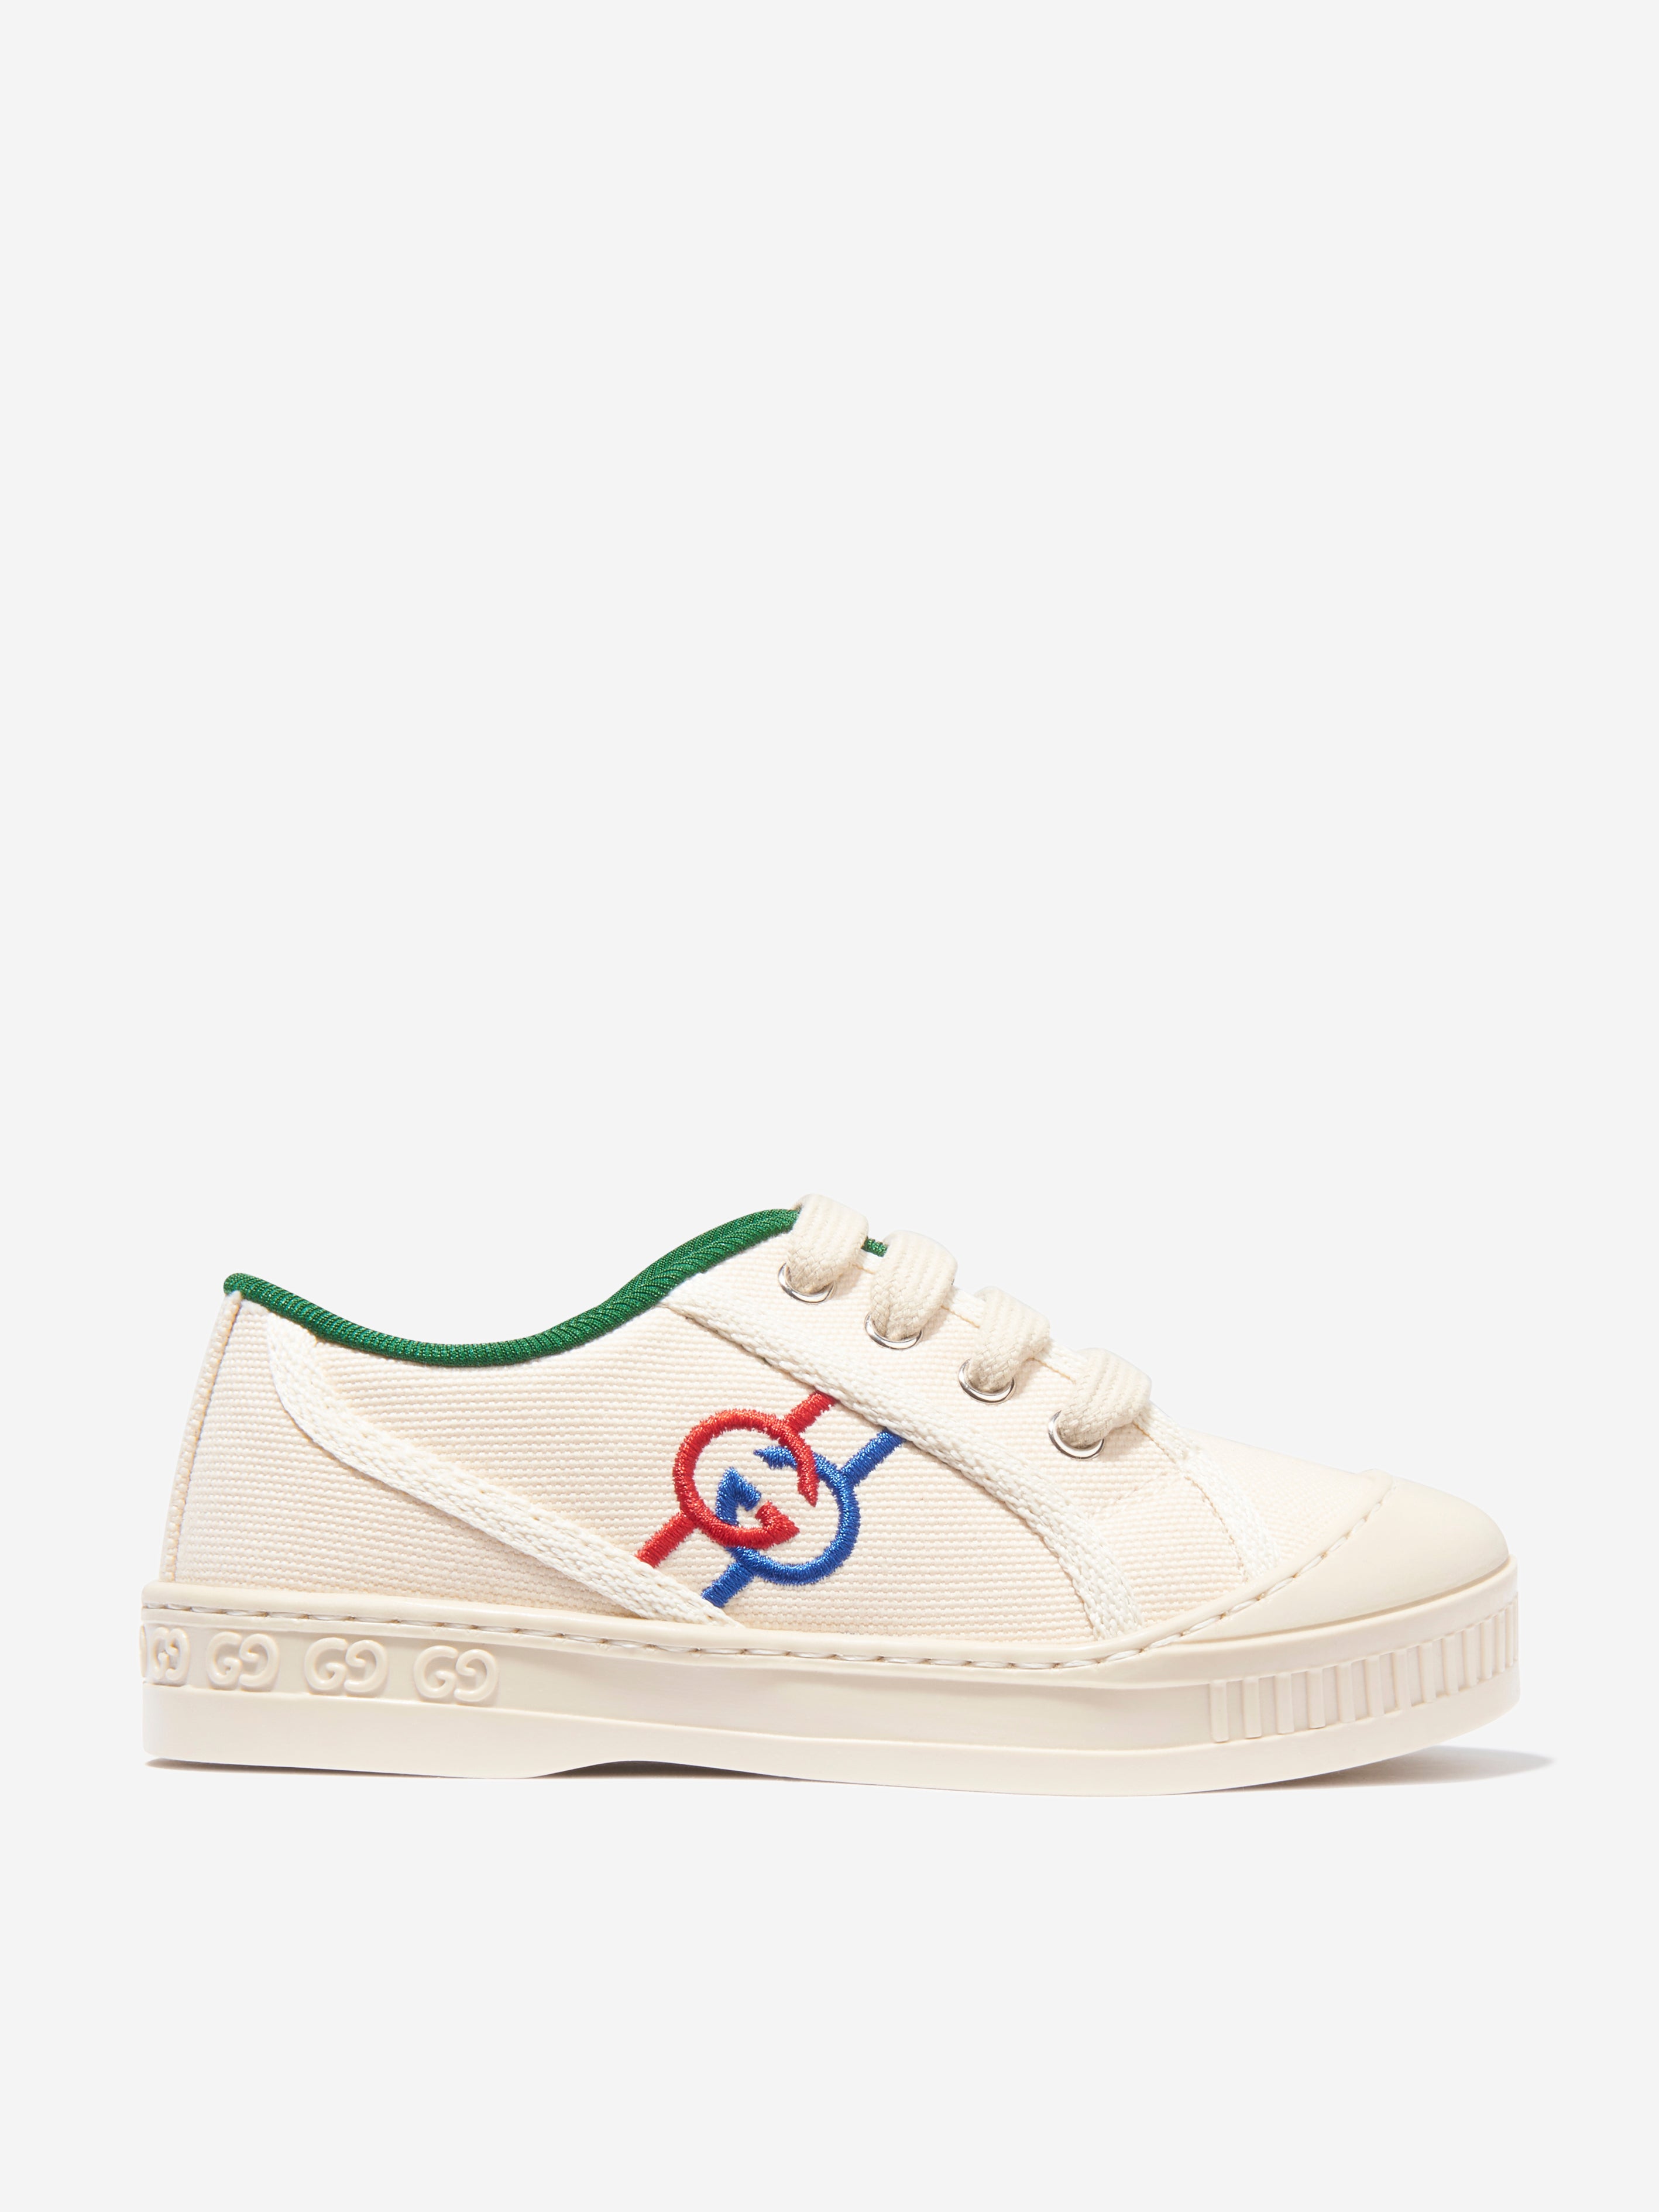 Gucci Babies' Kids Gg Tennis Trainers In White